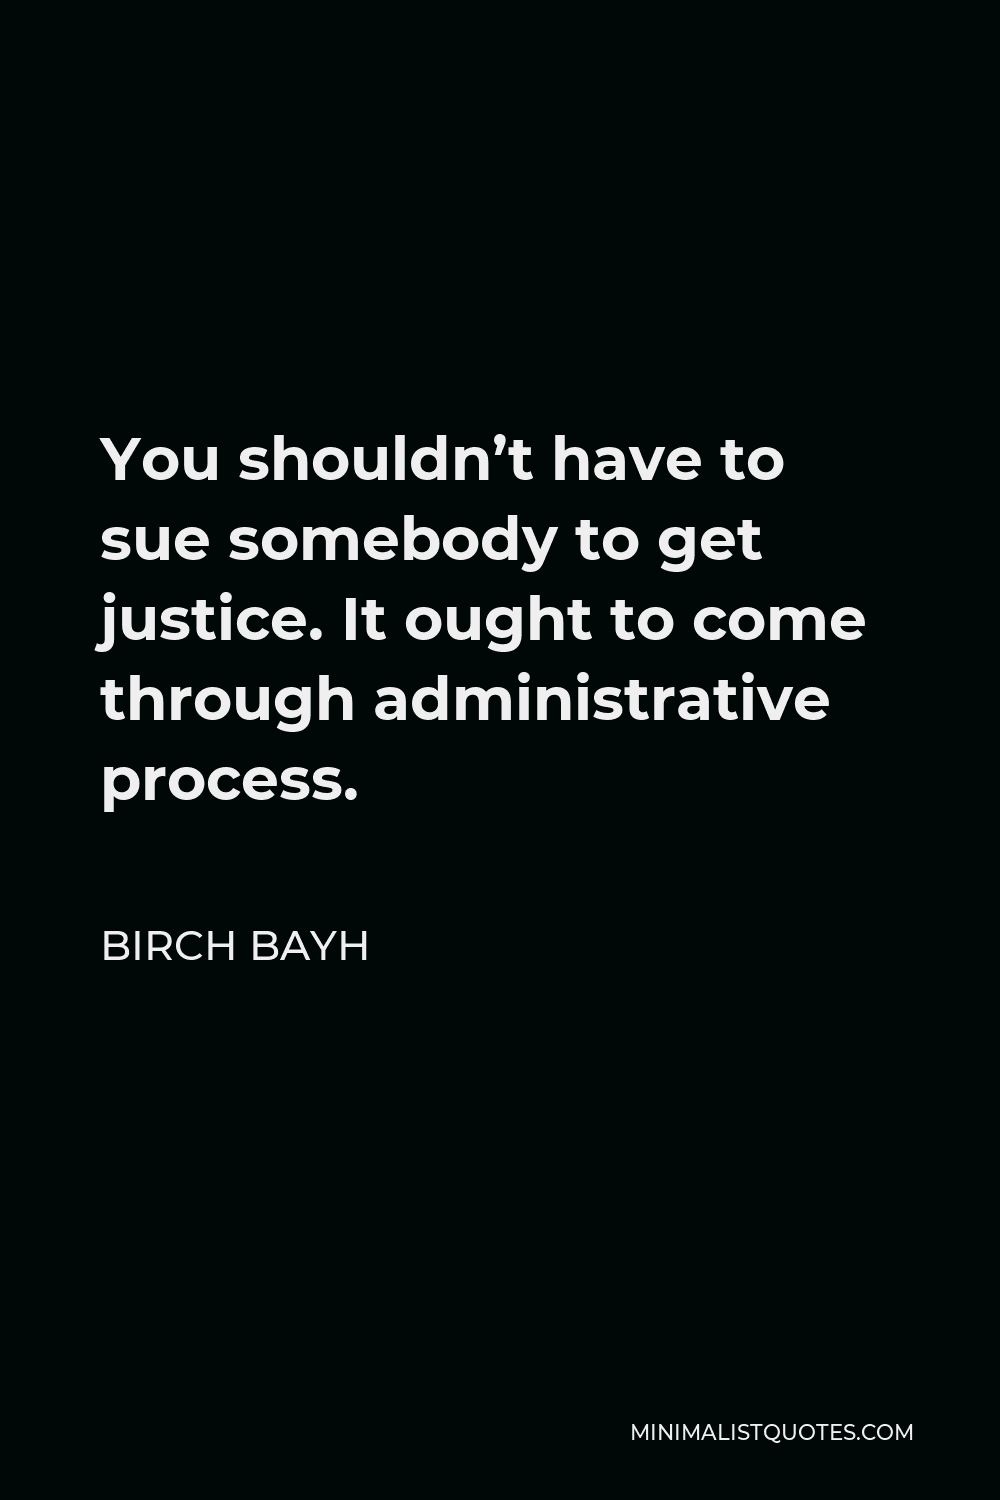 Birch Bayh Quote - You shouldn’t have to sue somebody to get justice. It ought to come through administrative process.